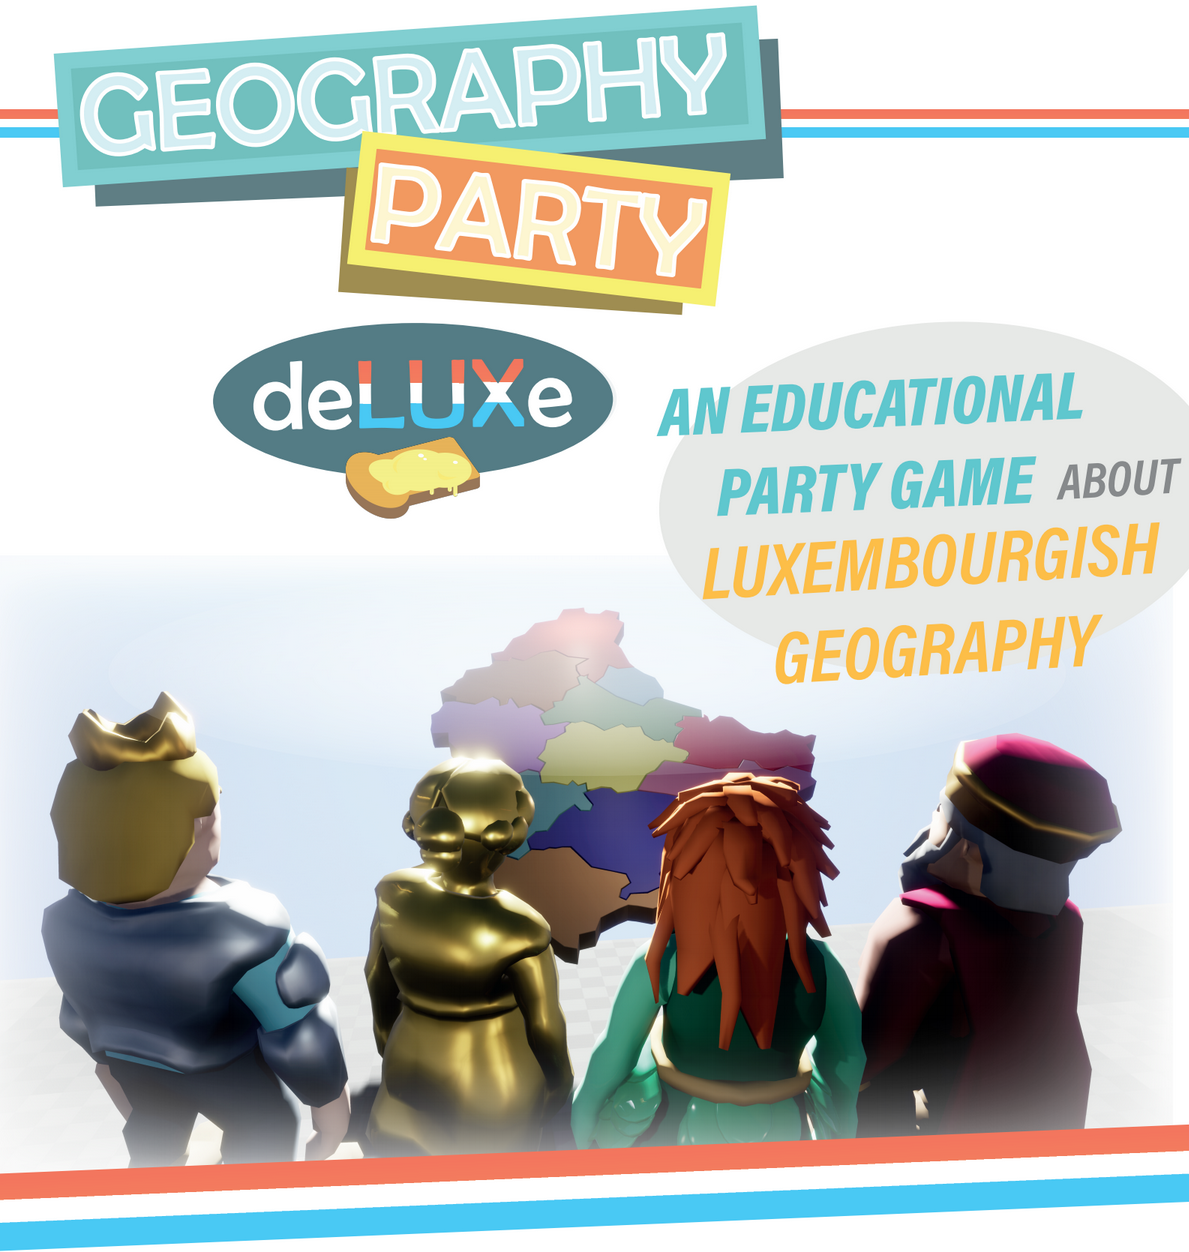 Geography-Party-Deluxe